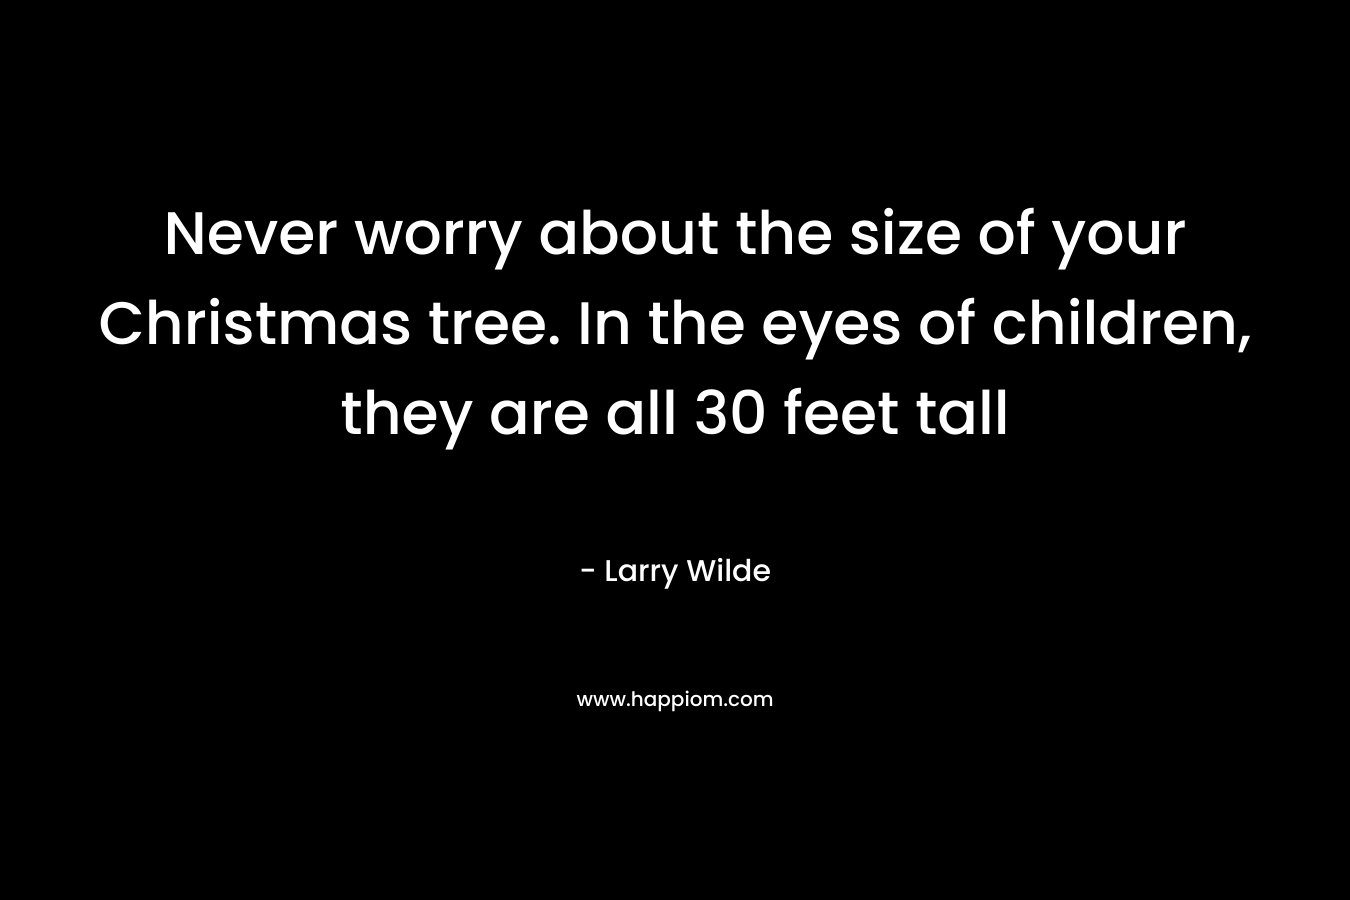 Never worry about the size of your Christmas tree. In the eyes of children, they are all 30 feet tall – Larry Wilde